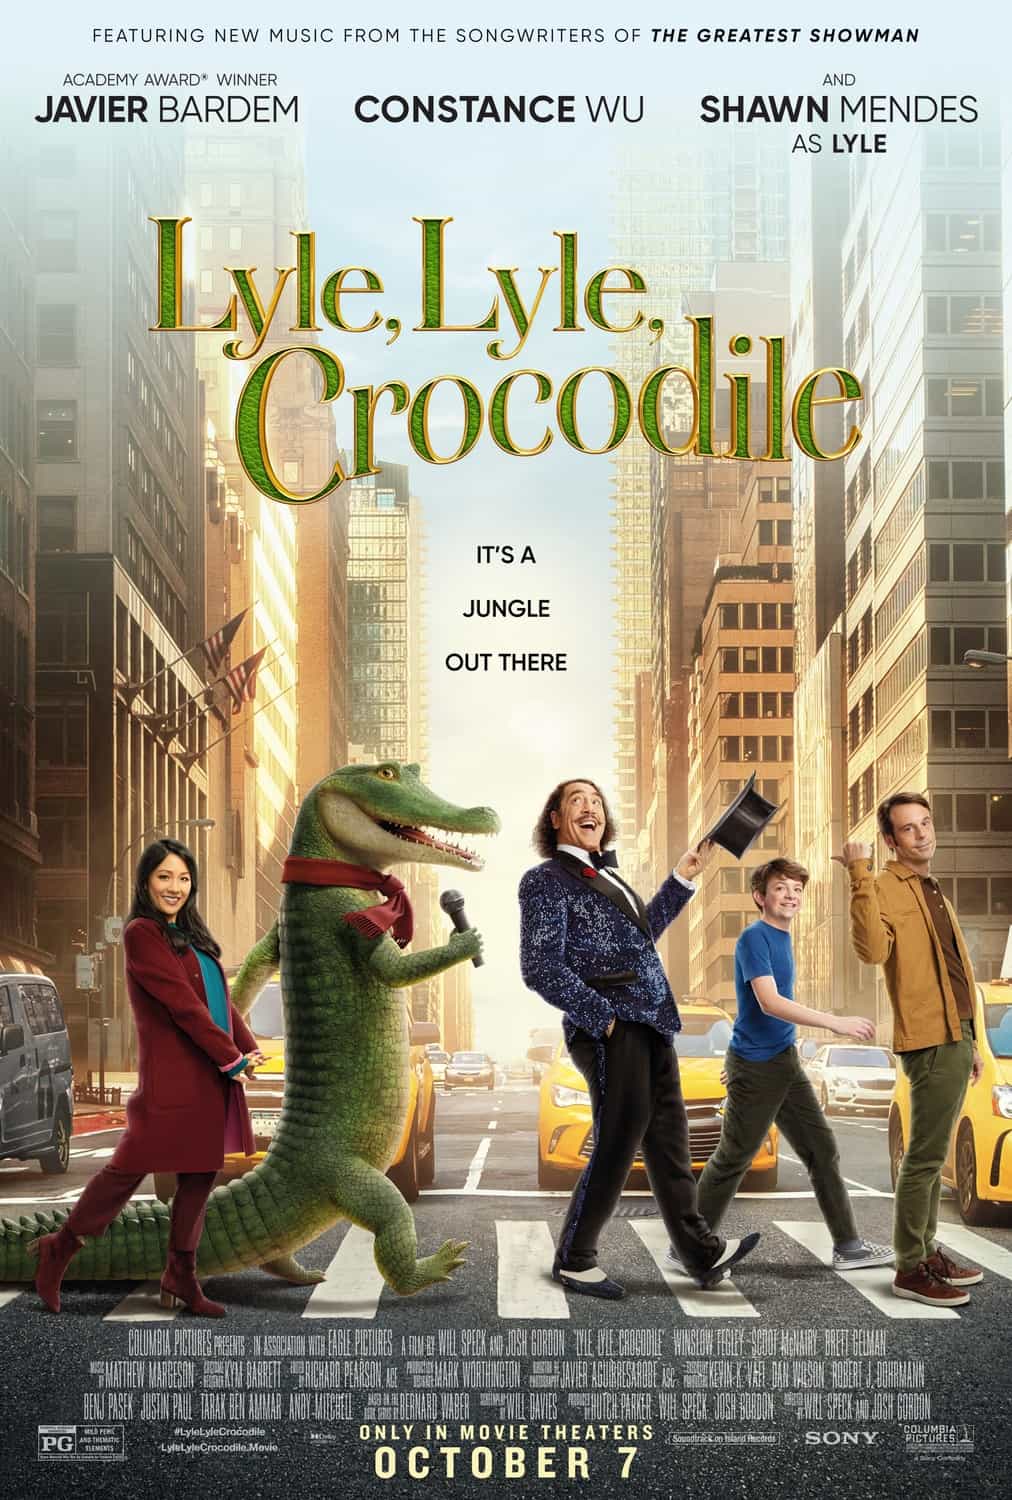 UK Box Office Weekend Report 14th - 16th October 2022:  Lyle, Lyle Crocodile beats Halloween Ends to the top of the UK box office as they both make their debuts